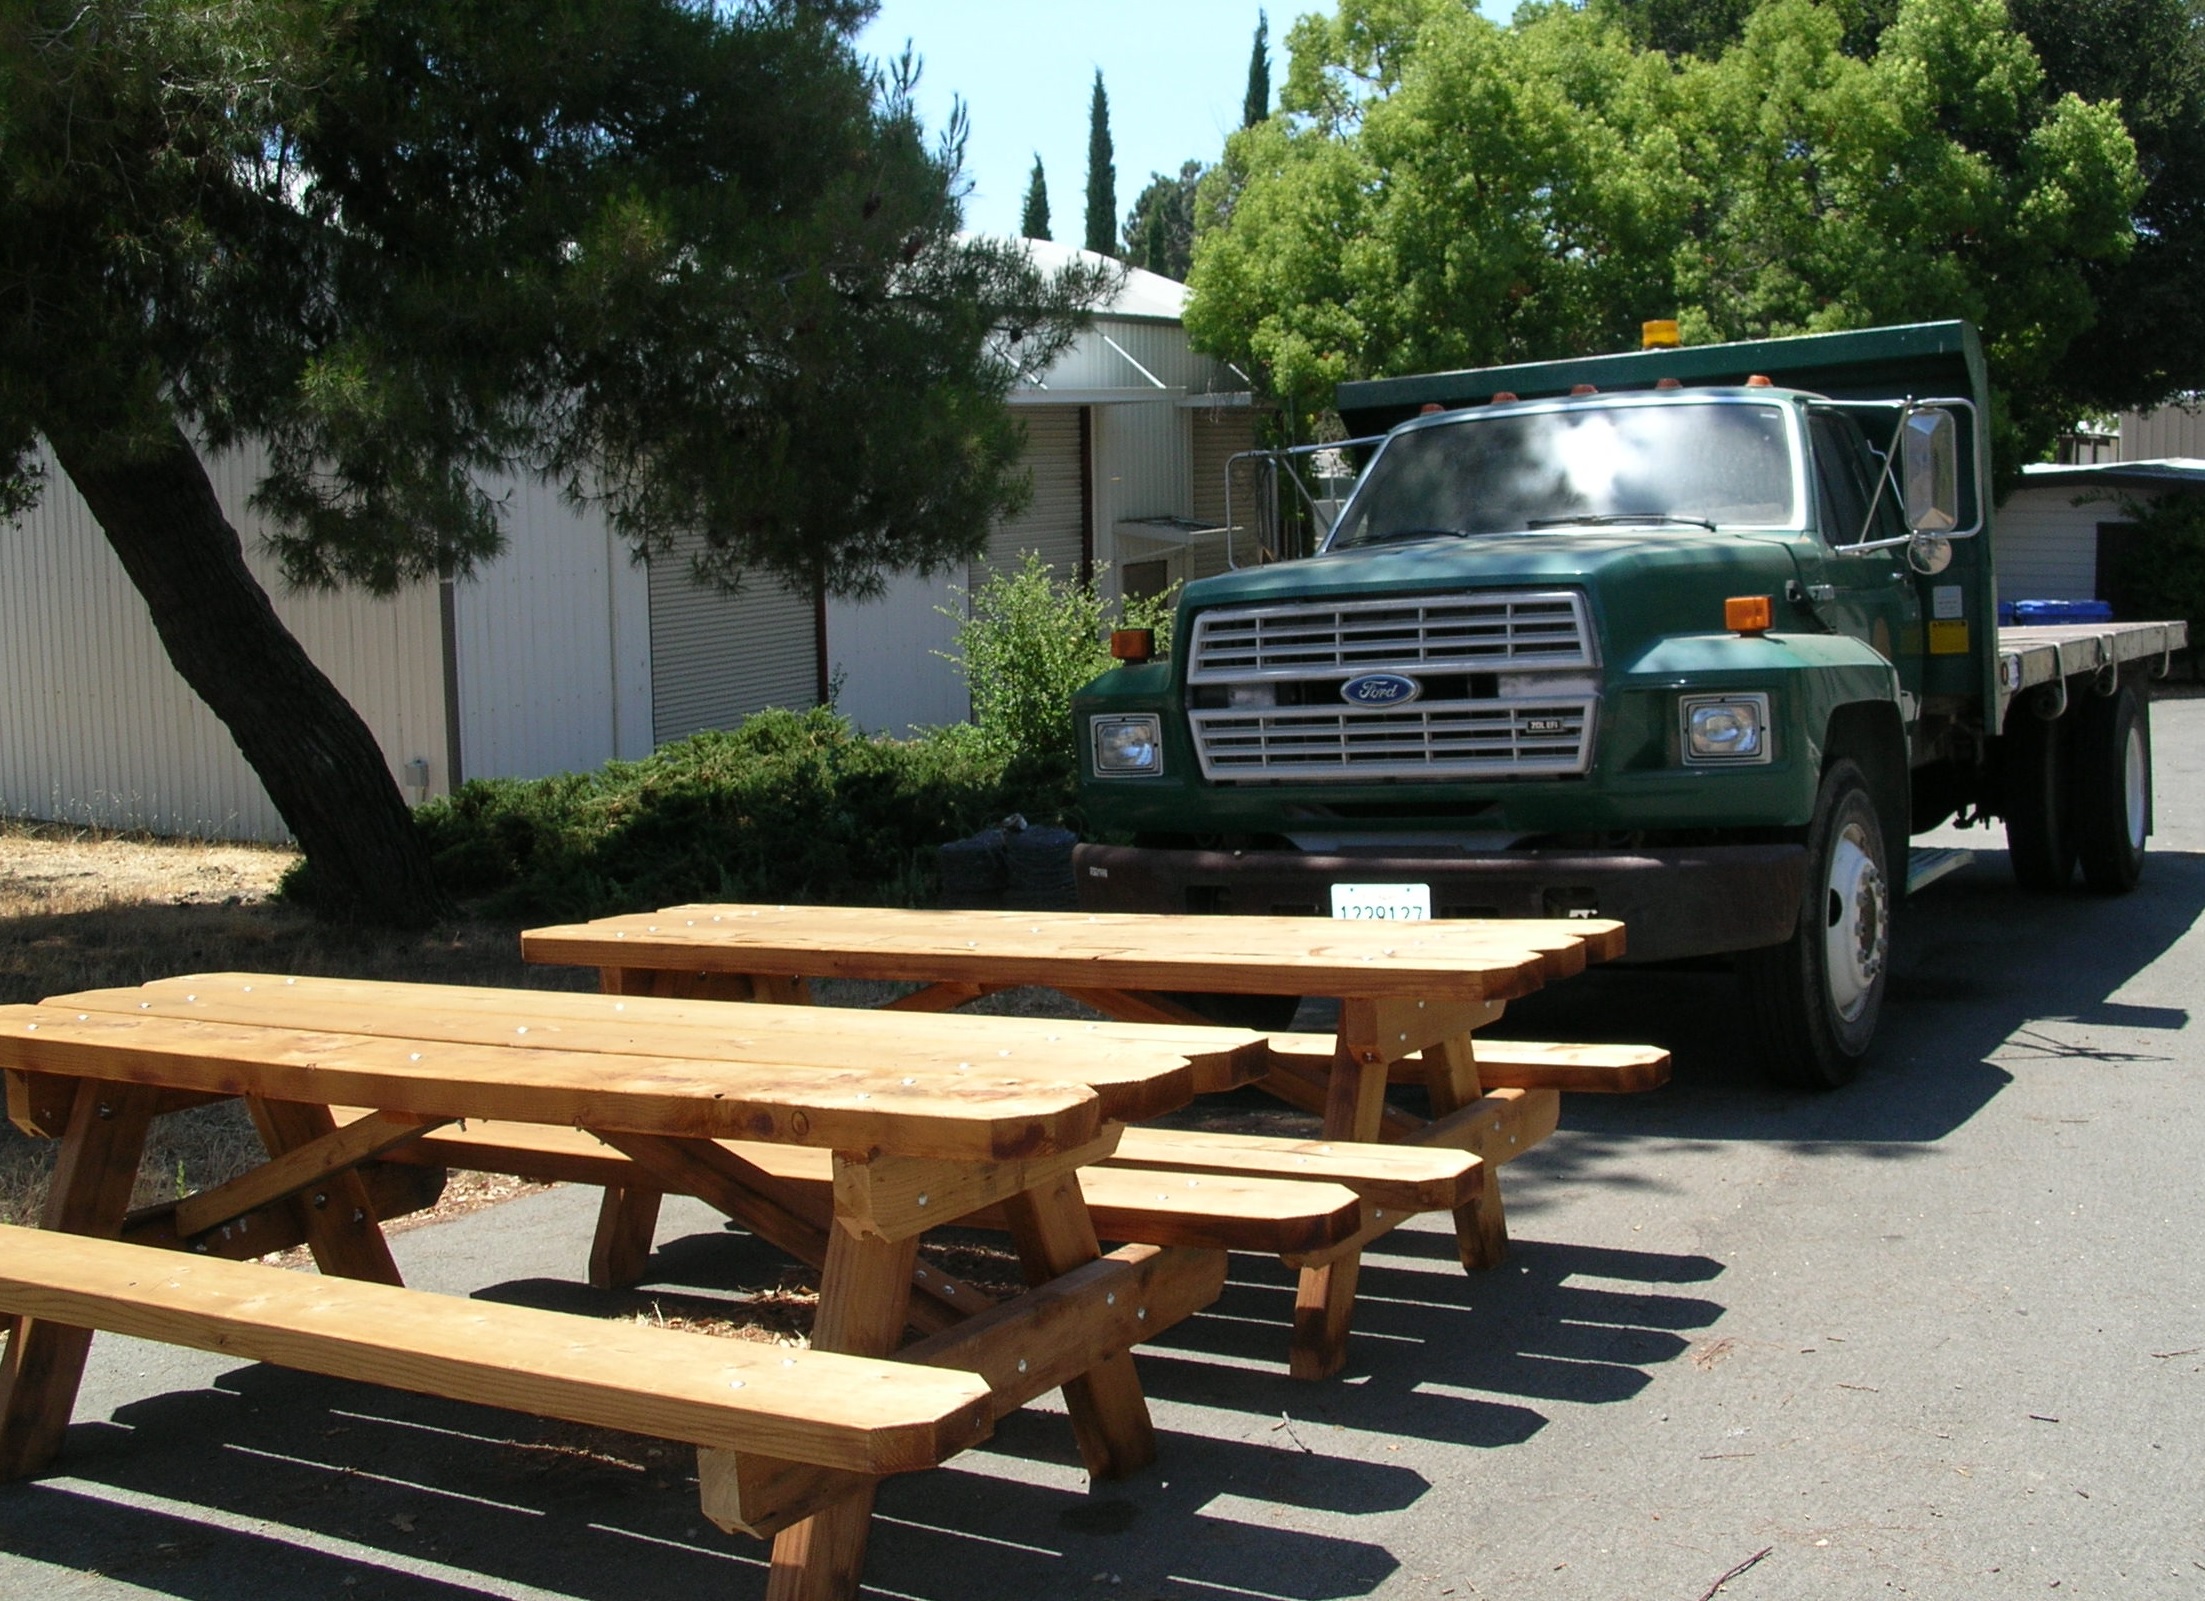 Picture of the James Ranch wood benches and truck